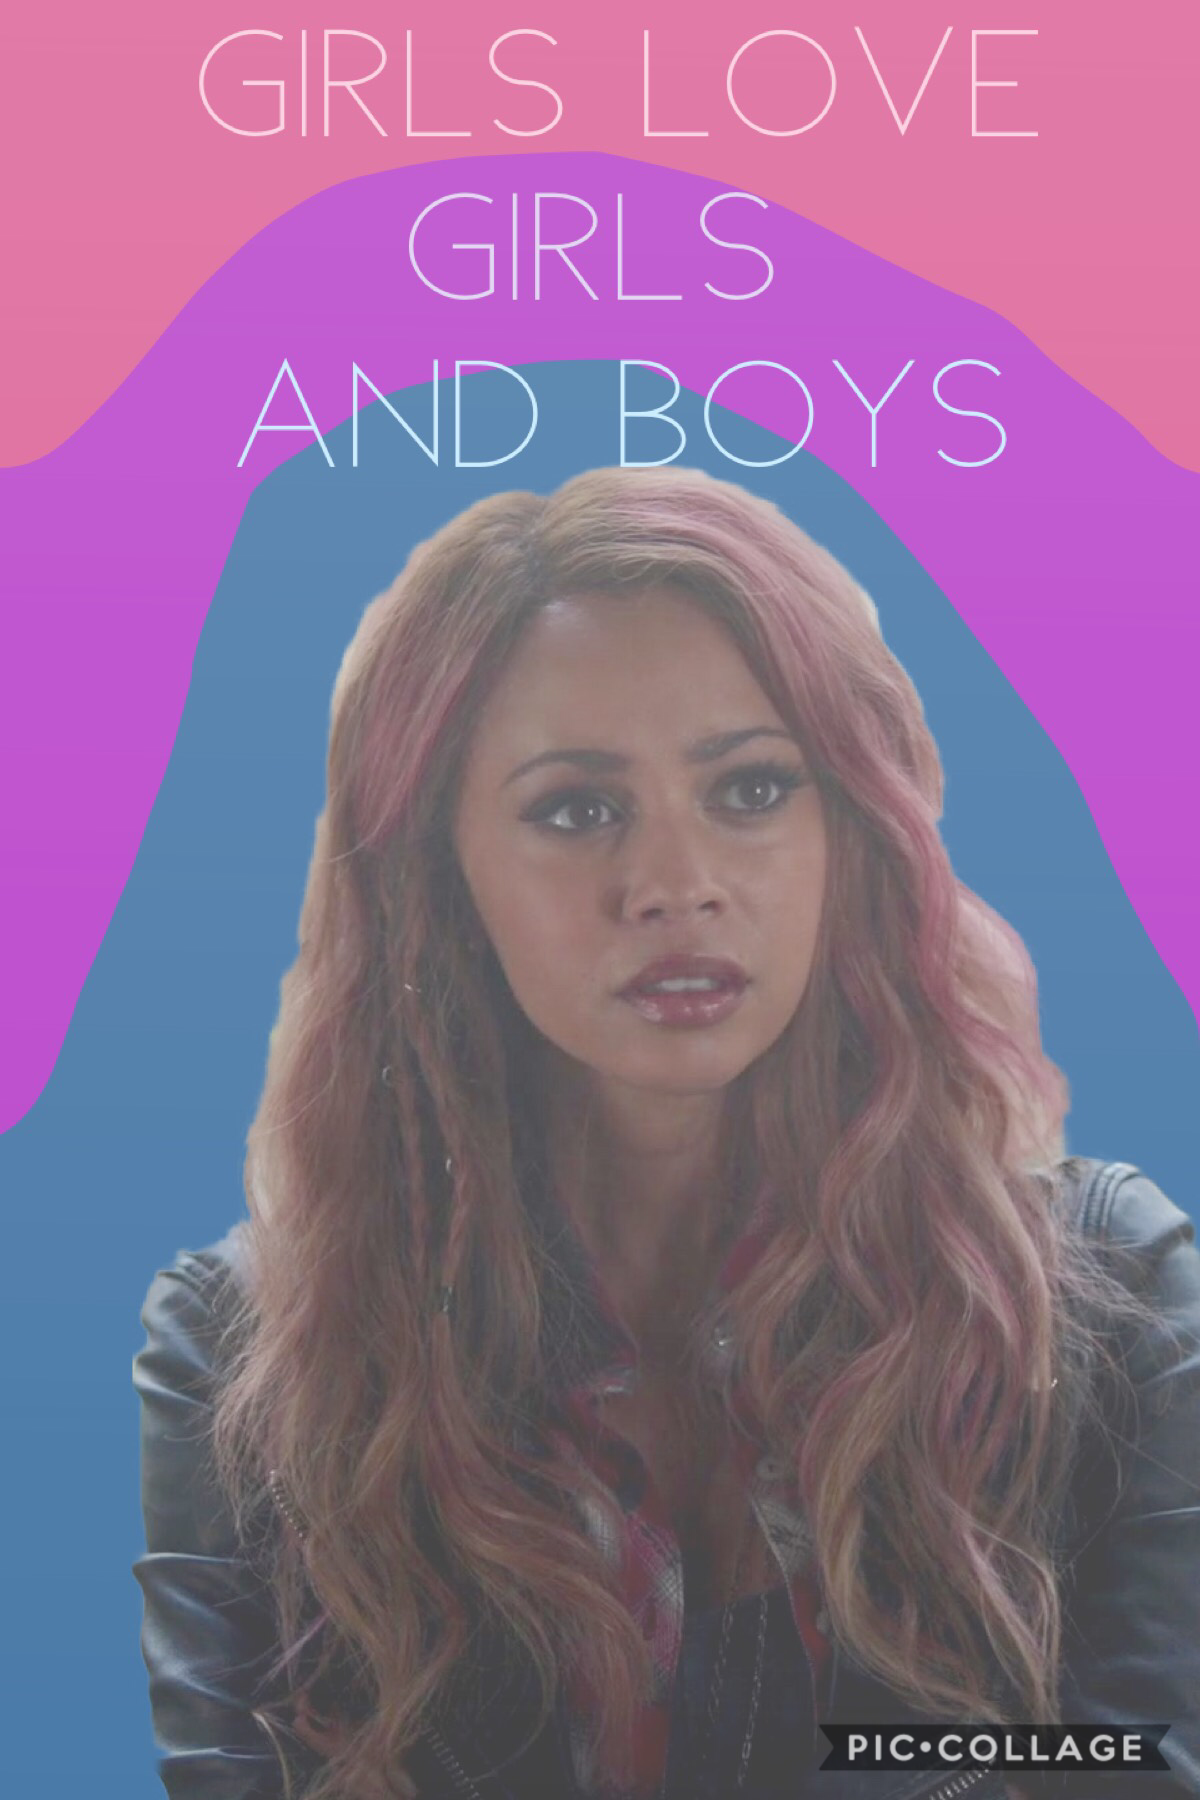 I think Toni Topaz is my new favorite character 